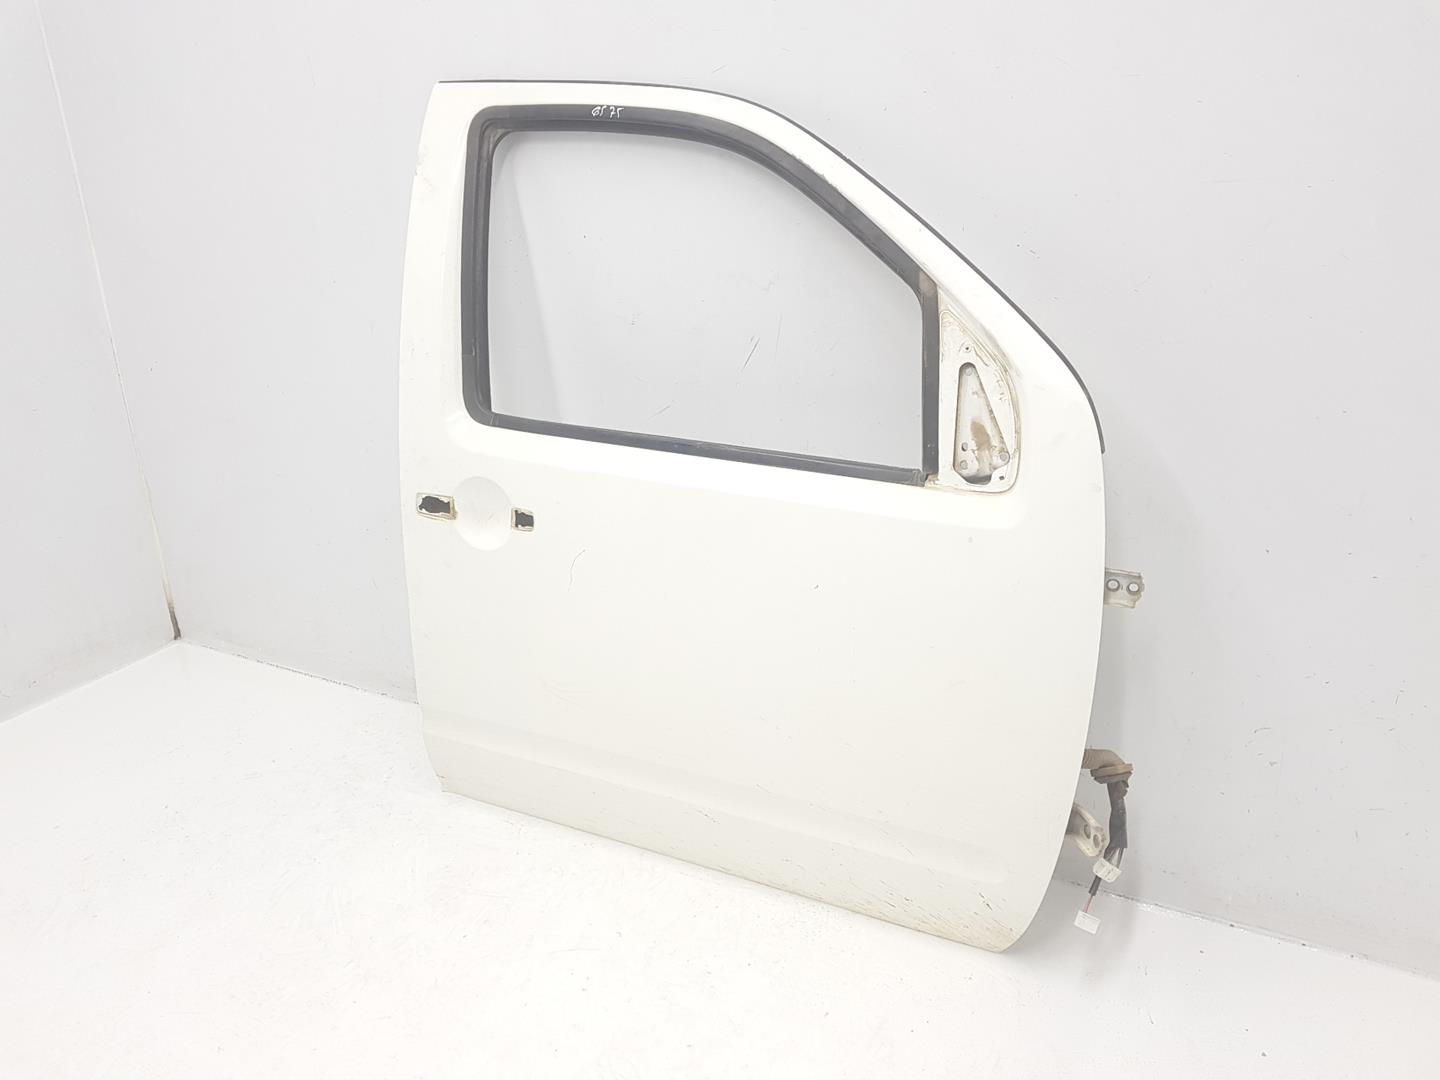 NISSAN Pathfinder R51 (2004-2014) Front Right Door 80100EB330, 80100EB330, COLORBLANCOSOLIDO326 22485495